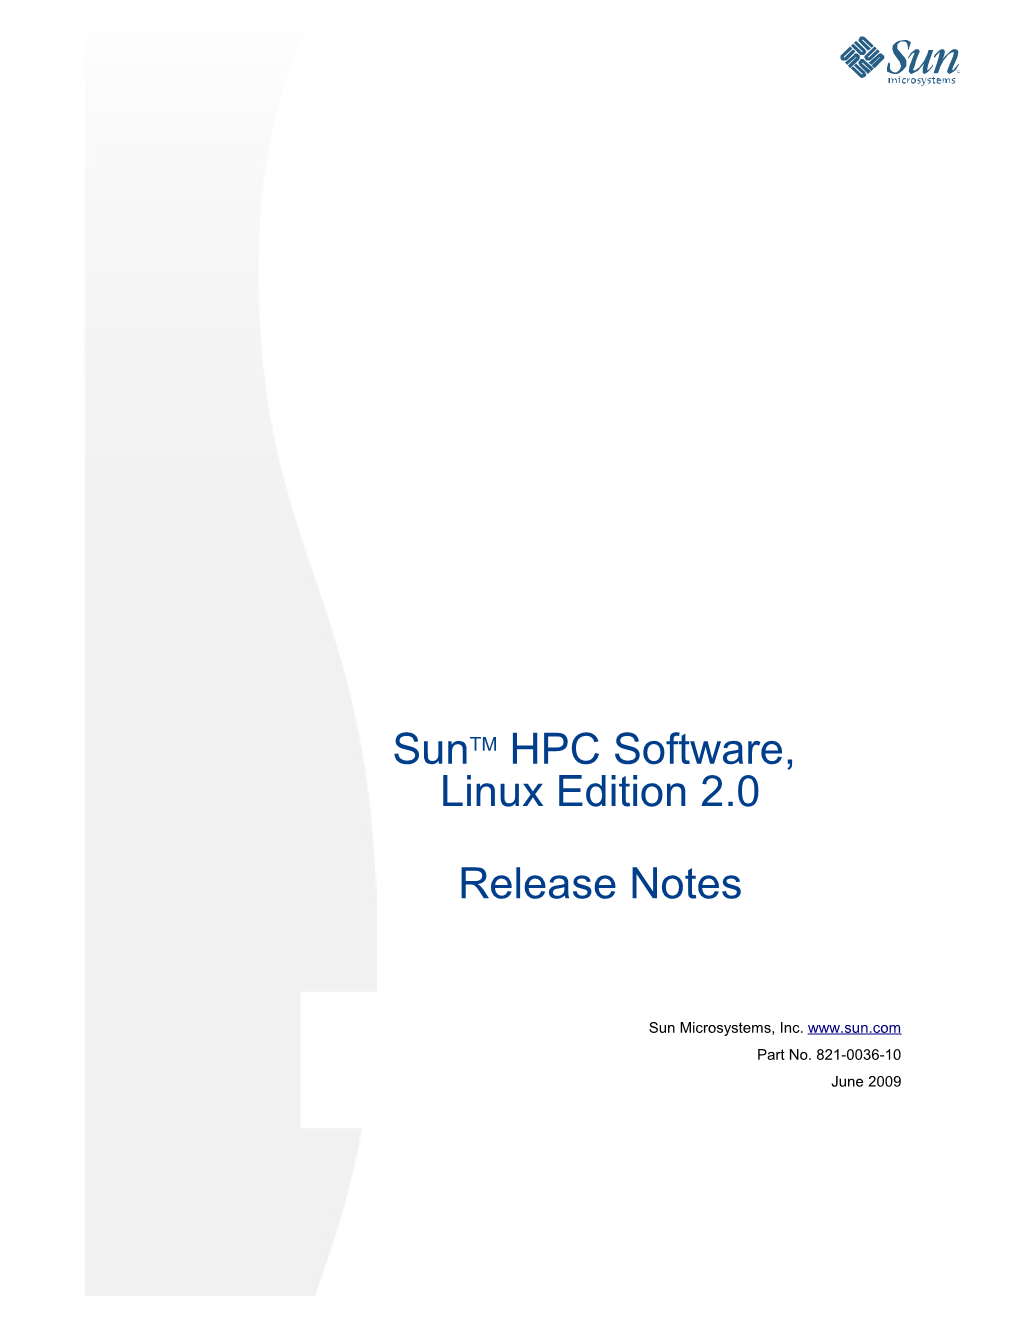 Sun HPC Software, Linux Edition 2.0, Release Notes